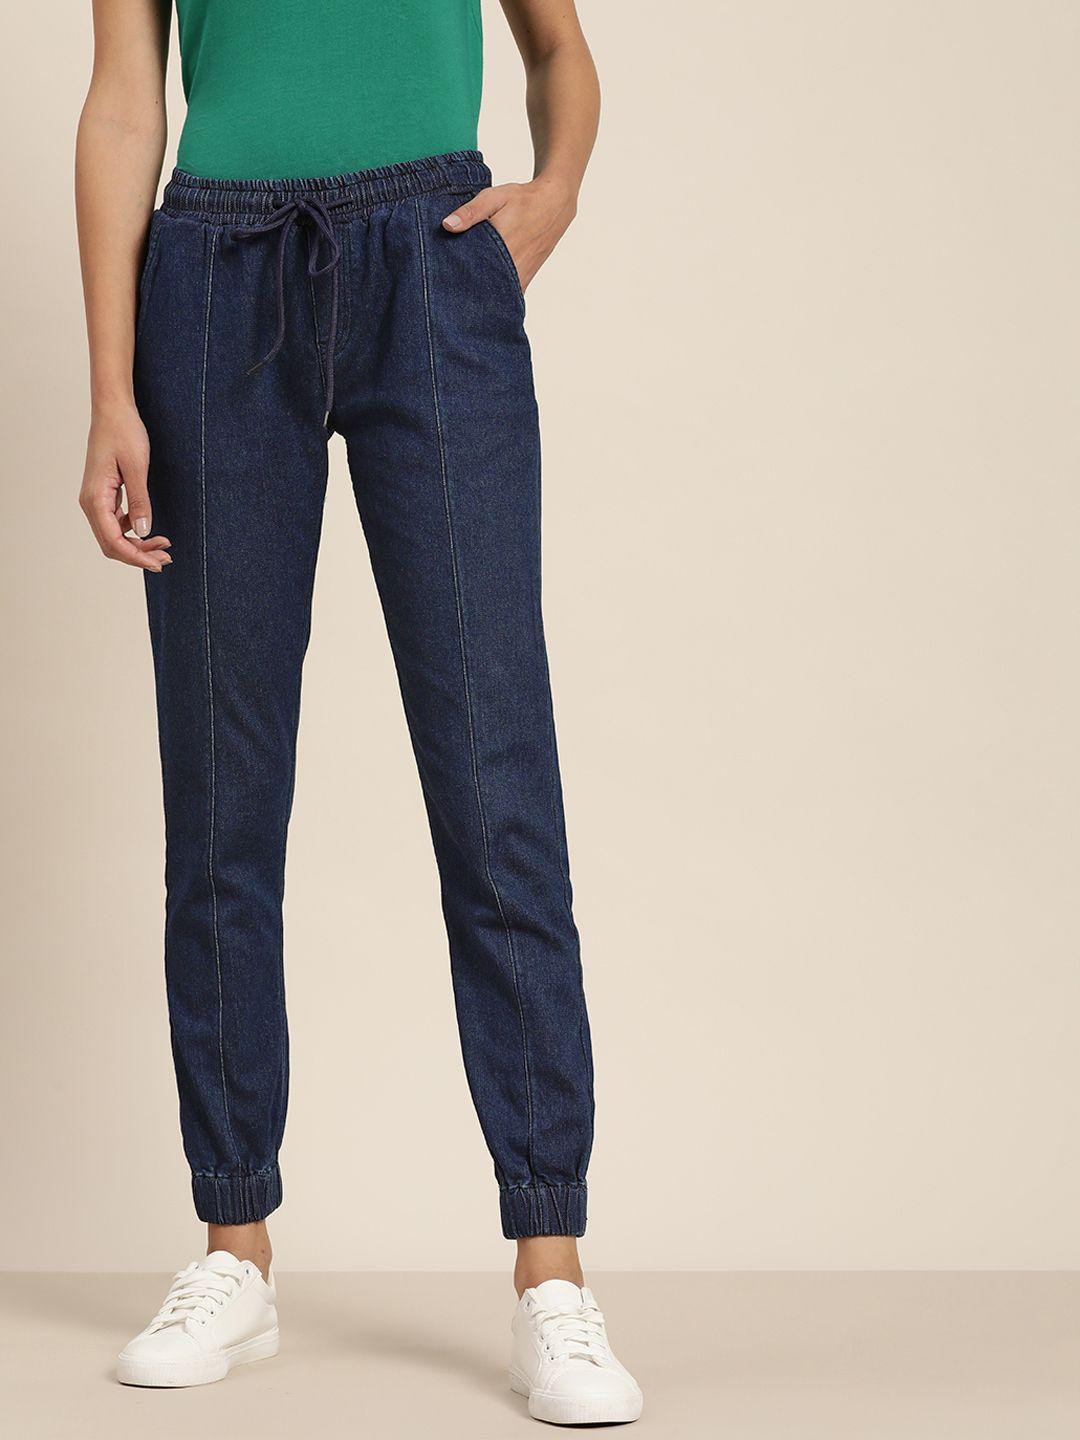 ether-women-navy-blue-solid-stretchable-jogger-jeans